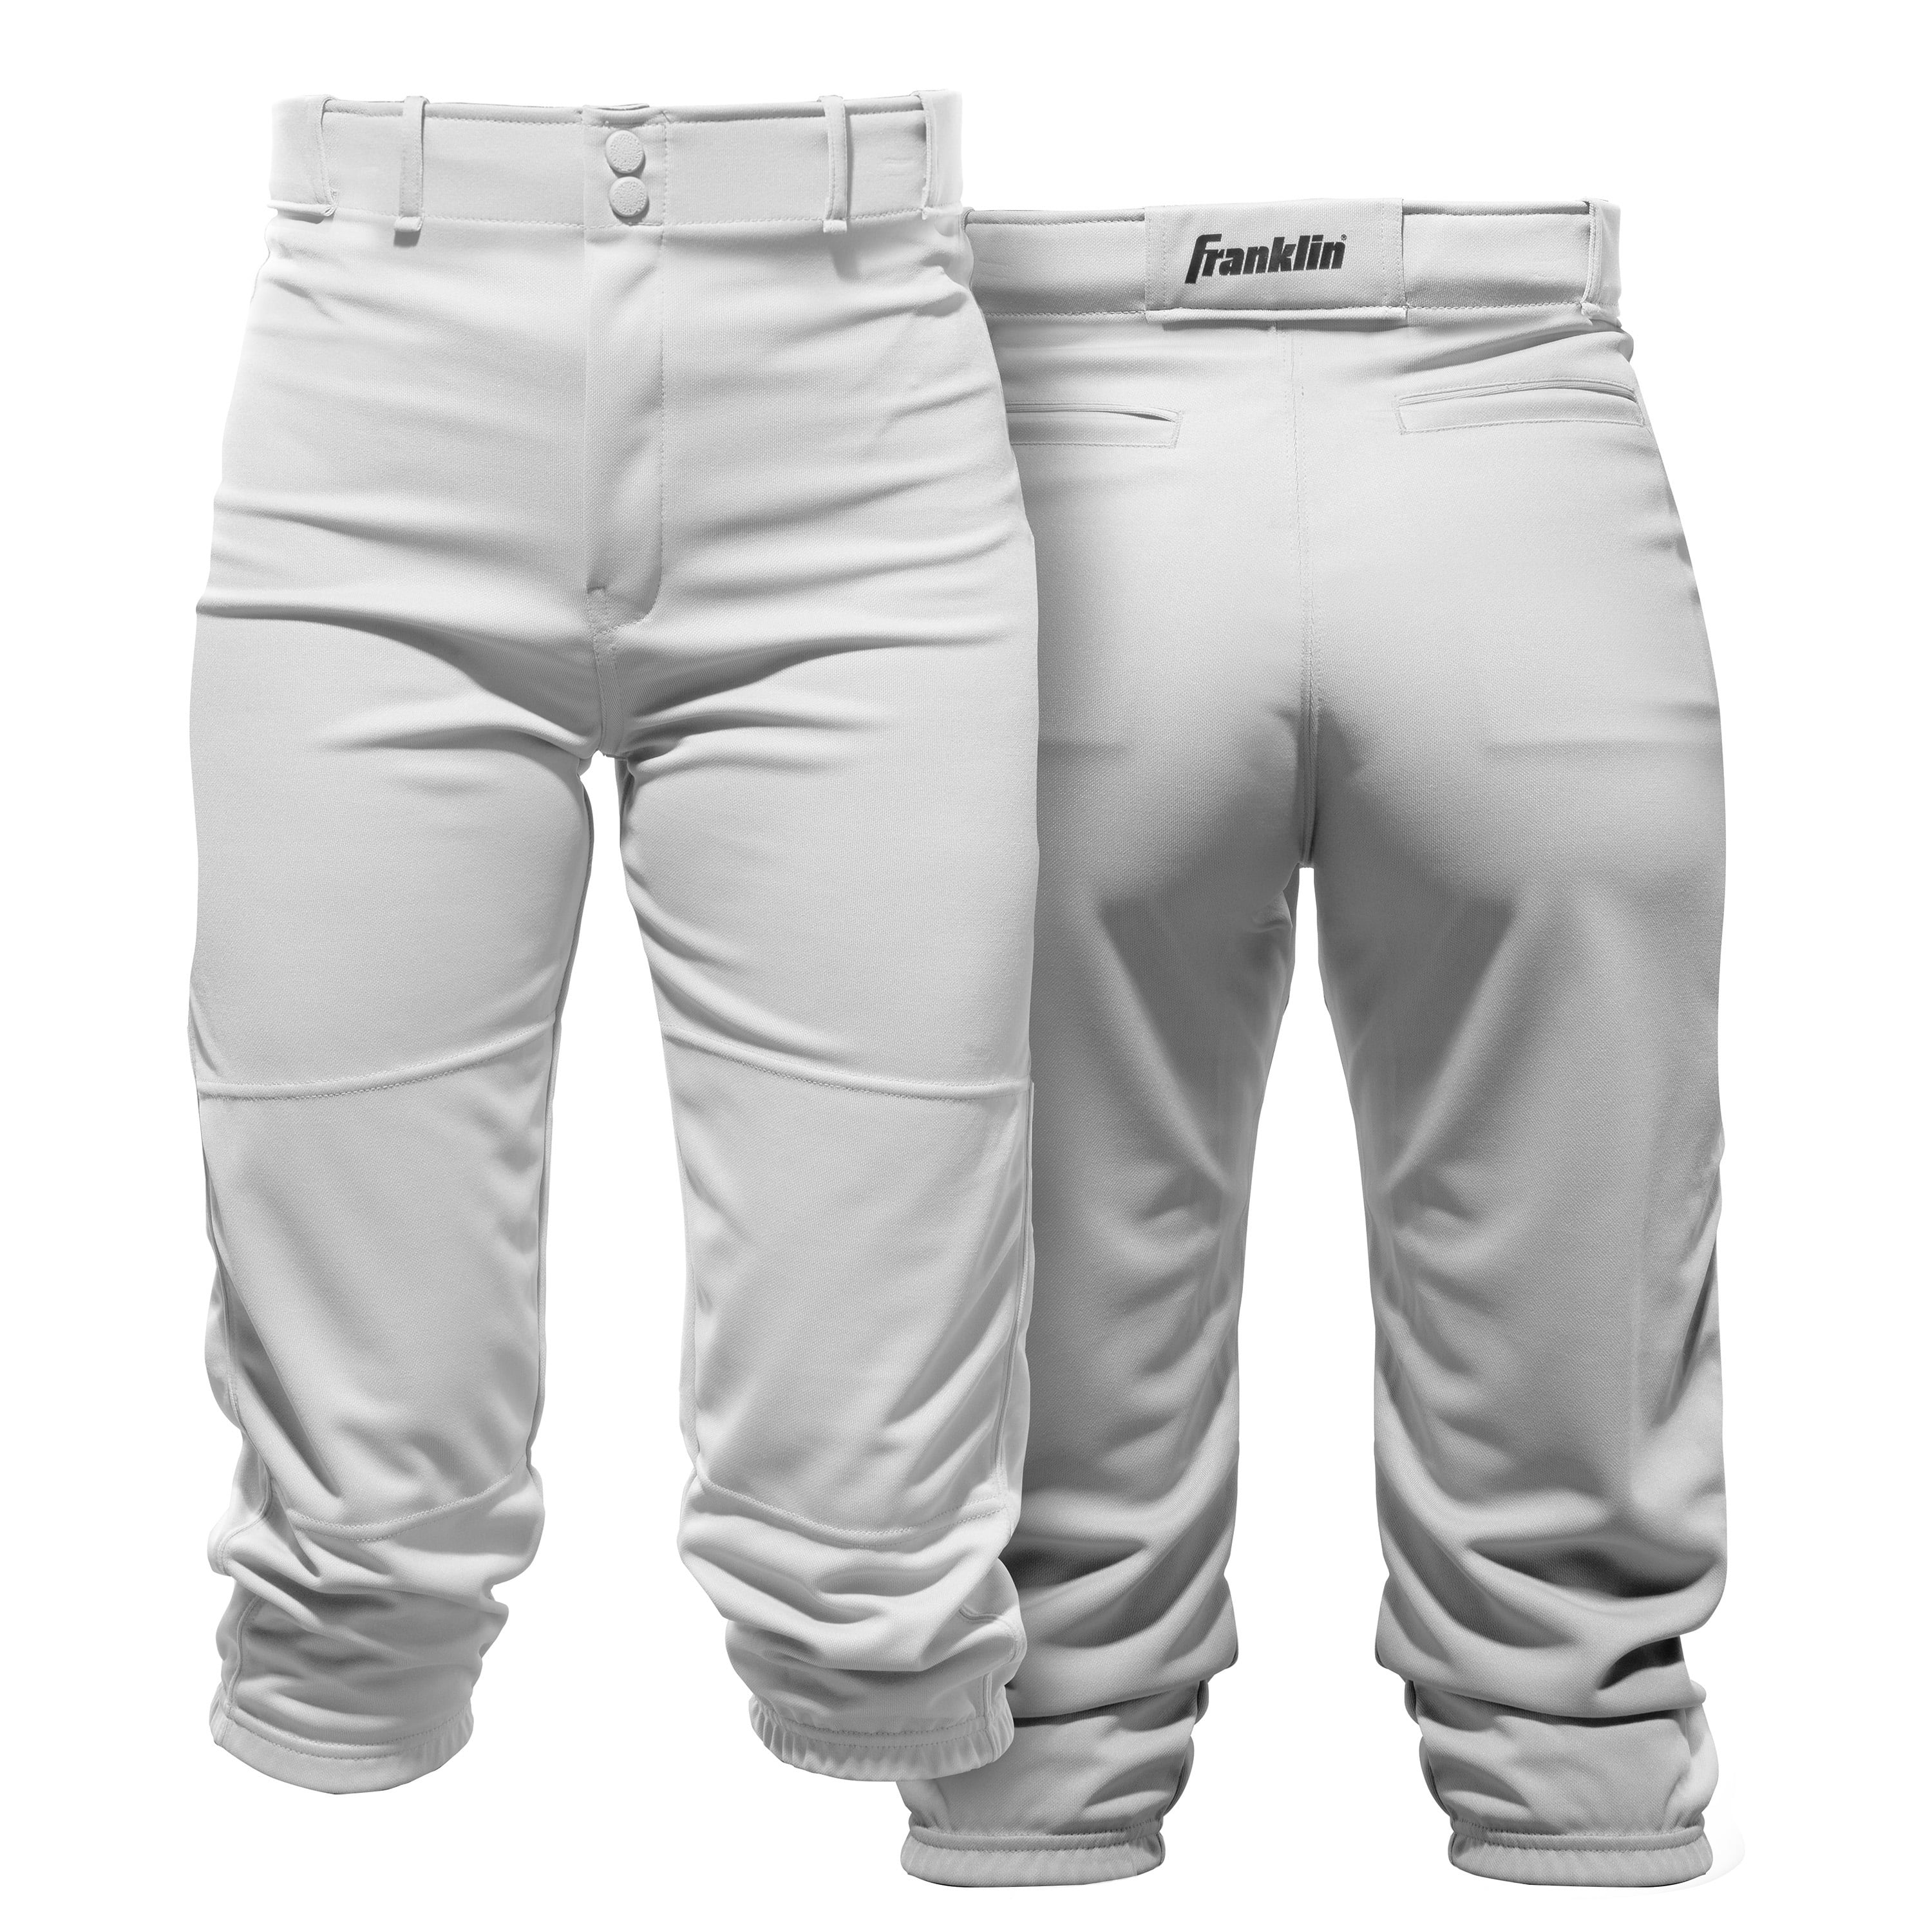 20 to 22 WAIST Details about   Franklin Deluxe BASEBALL Youth X-SMALL SOFTBALL PANTS White 